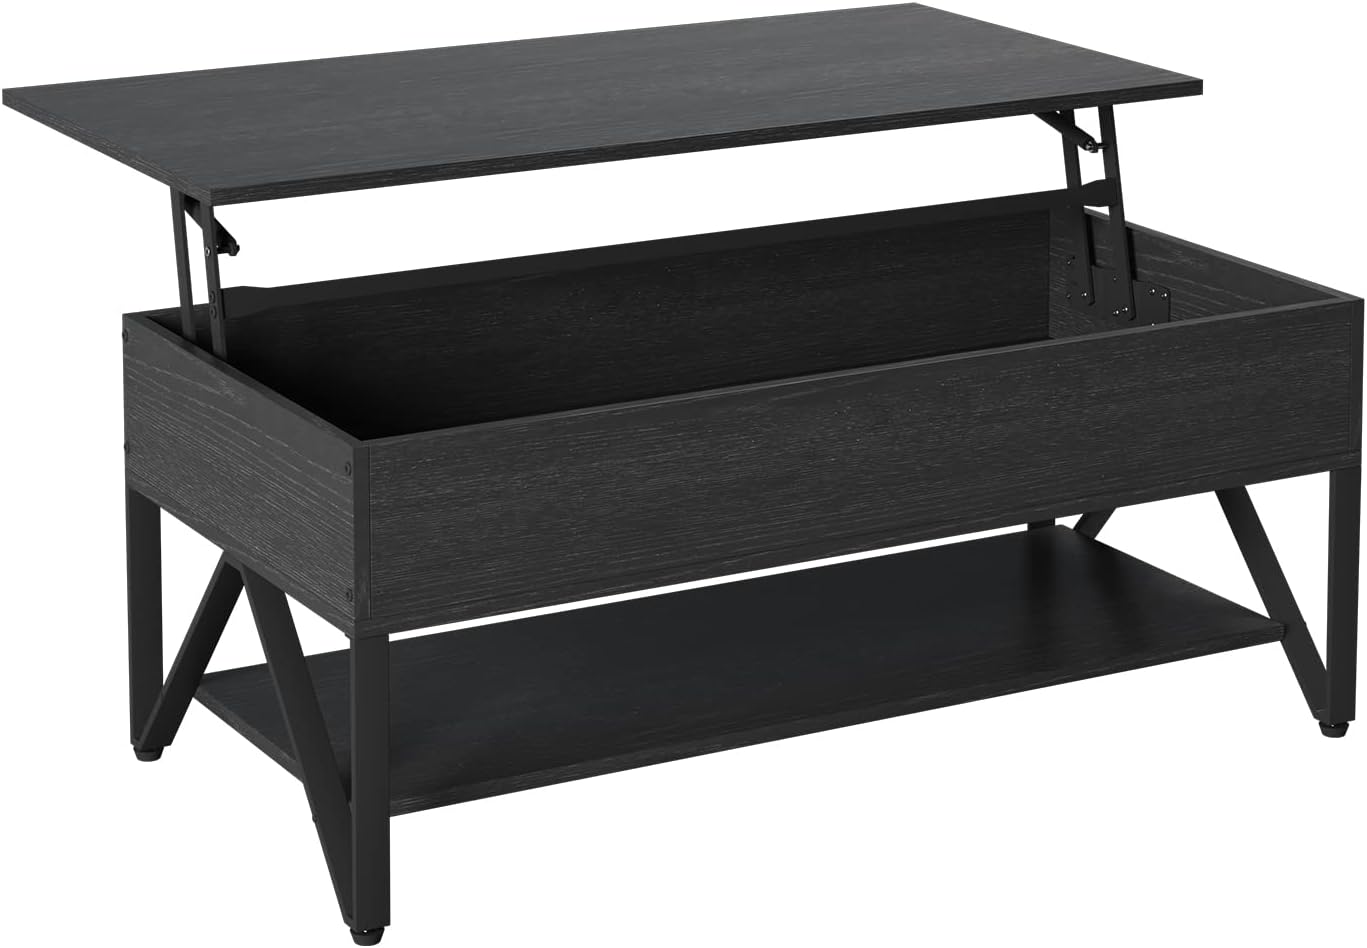 Novilla Lift Top Coffee Table with Storage 40 Inch Wood Lift Up Center Table for Living Room Tea Table with Hidden Compartment Rising Tabletop Table Cocktail Table, Black